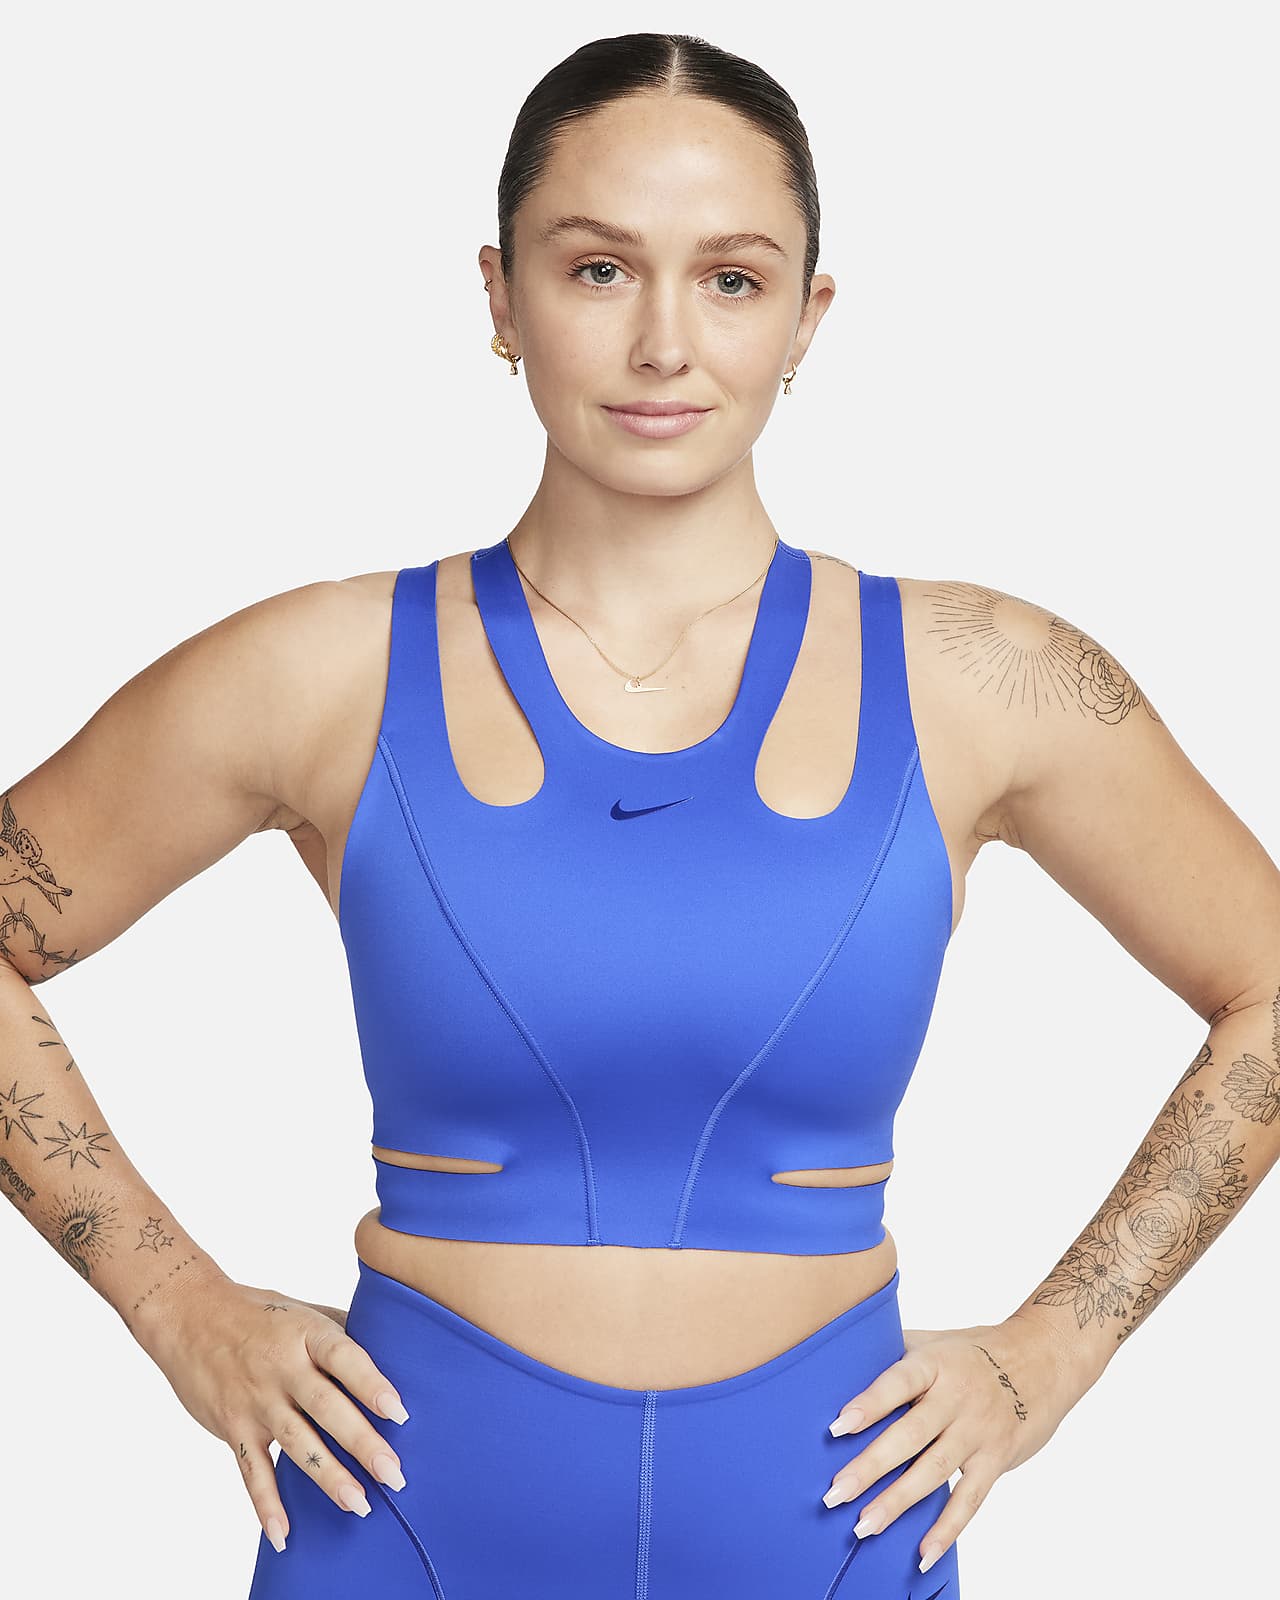 https://static.nike.com/a/images/t_PDP_1280_v1/f_auto,q_auto:eco/aa6ecf3b-ef46-480f-9667-8e82d3800837/futuremove-womens-light-support-non-padded-strappy-sports-bra-dtcRnk.png